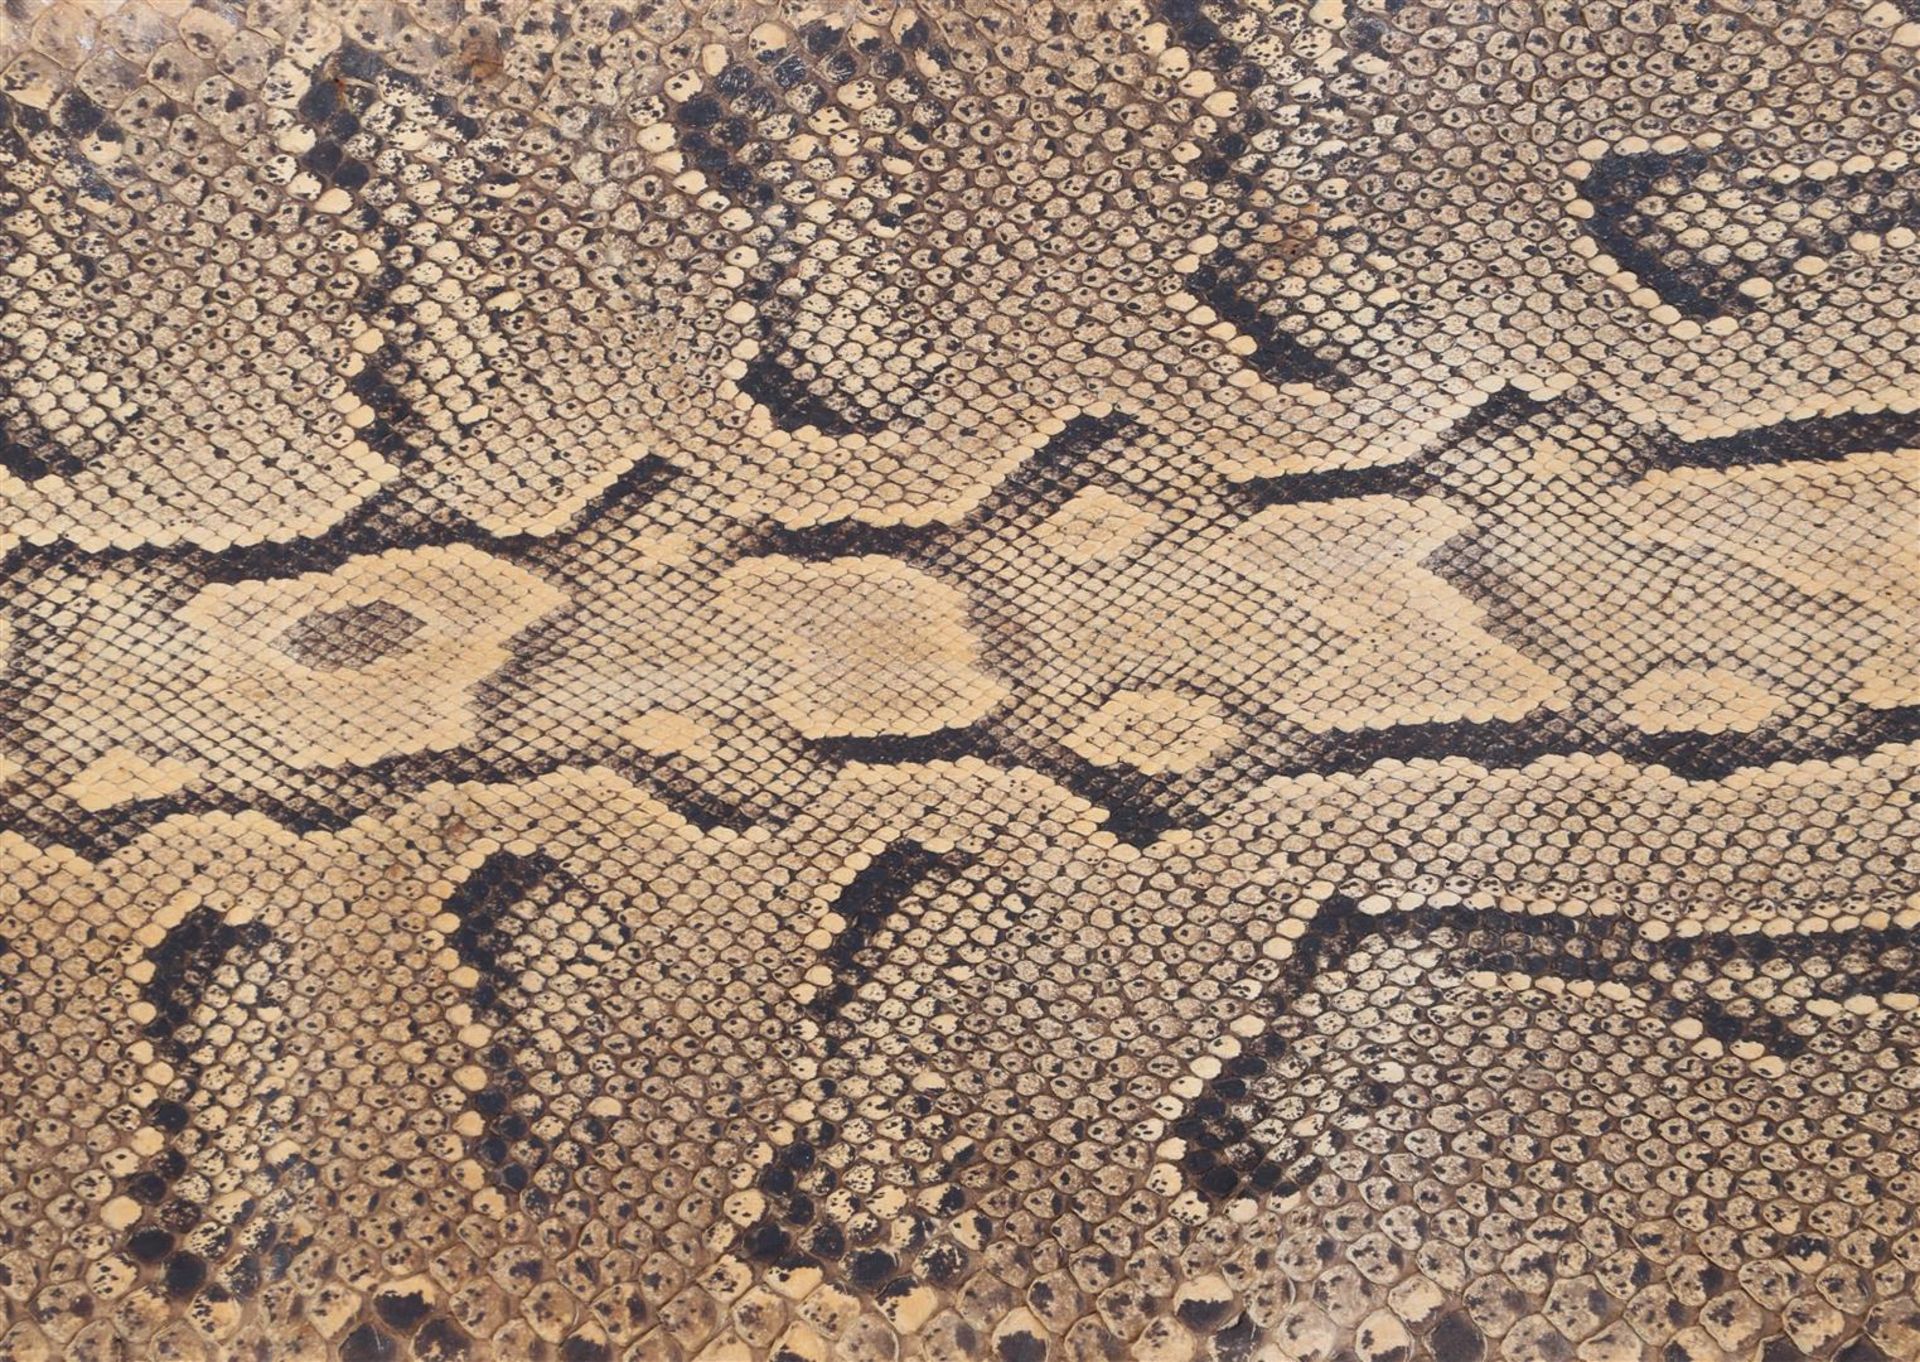 Skin of a python - Image 4 of 8